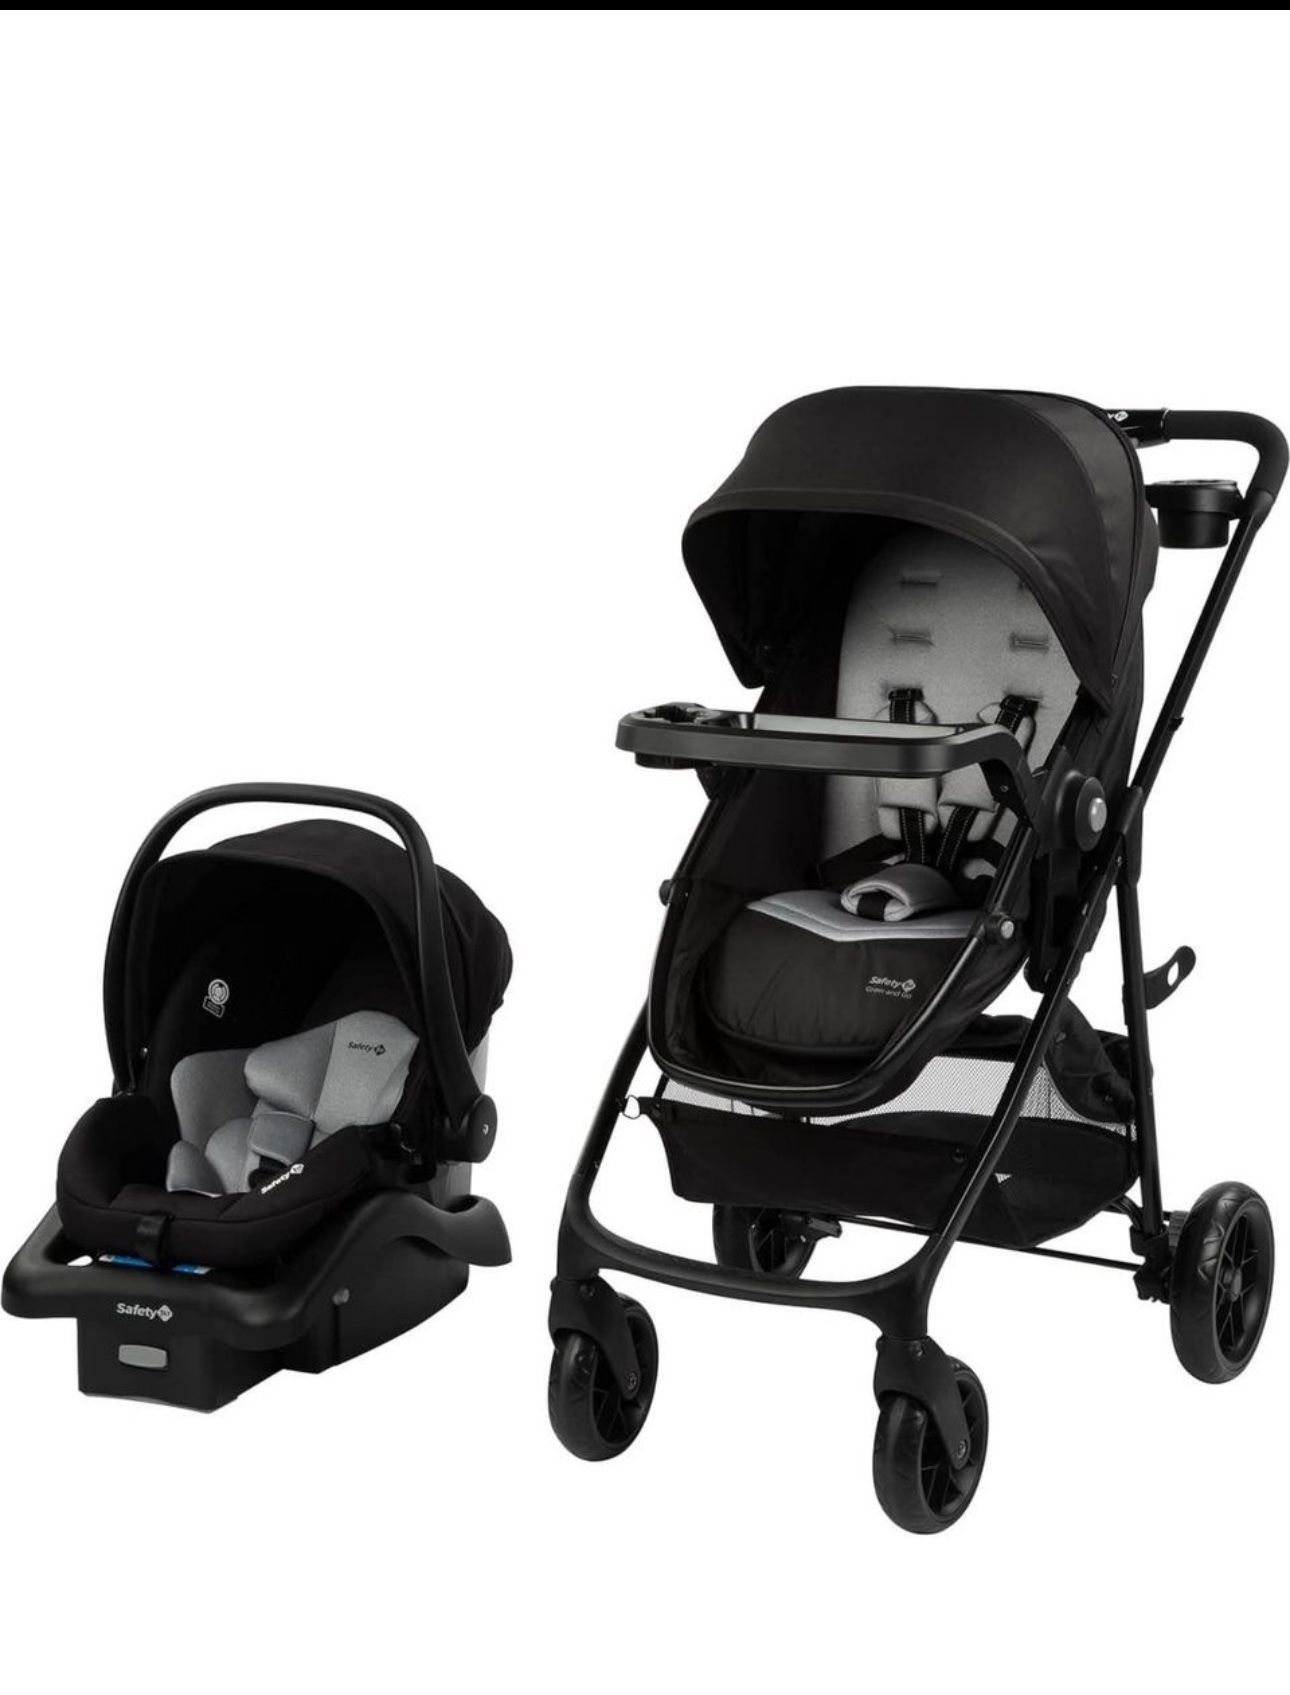 safety 1st Grow and Go Flex 8-in-1 Travel System (Infant Car Seat & Stroller)